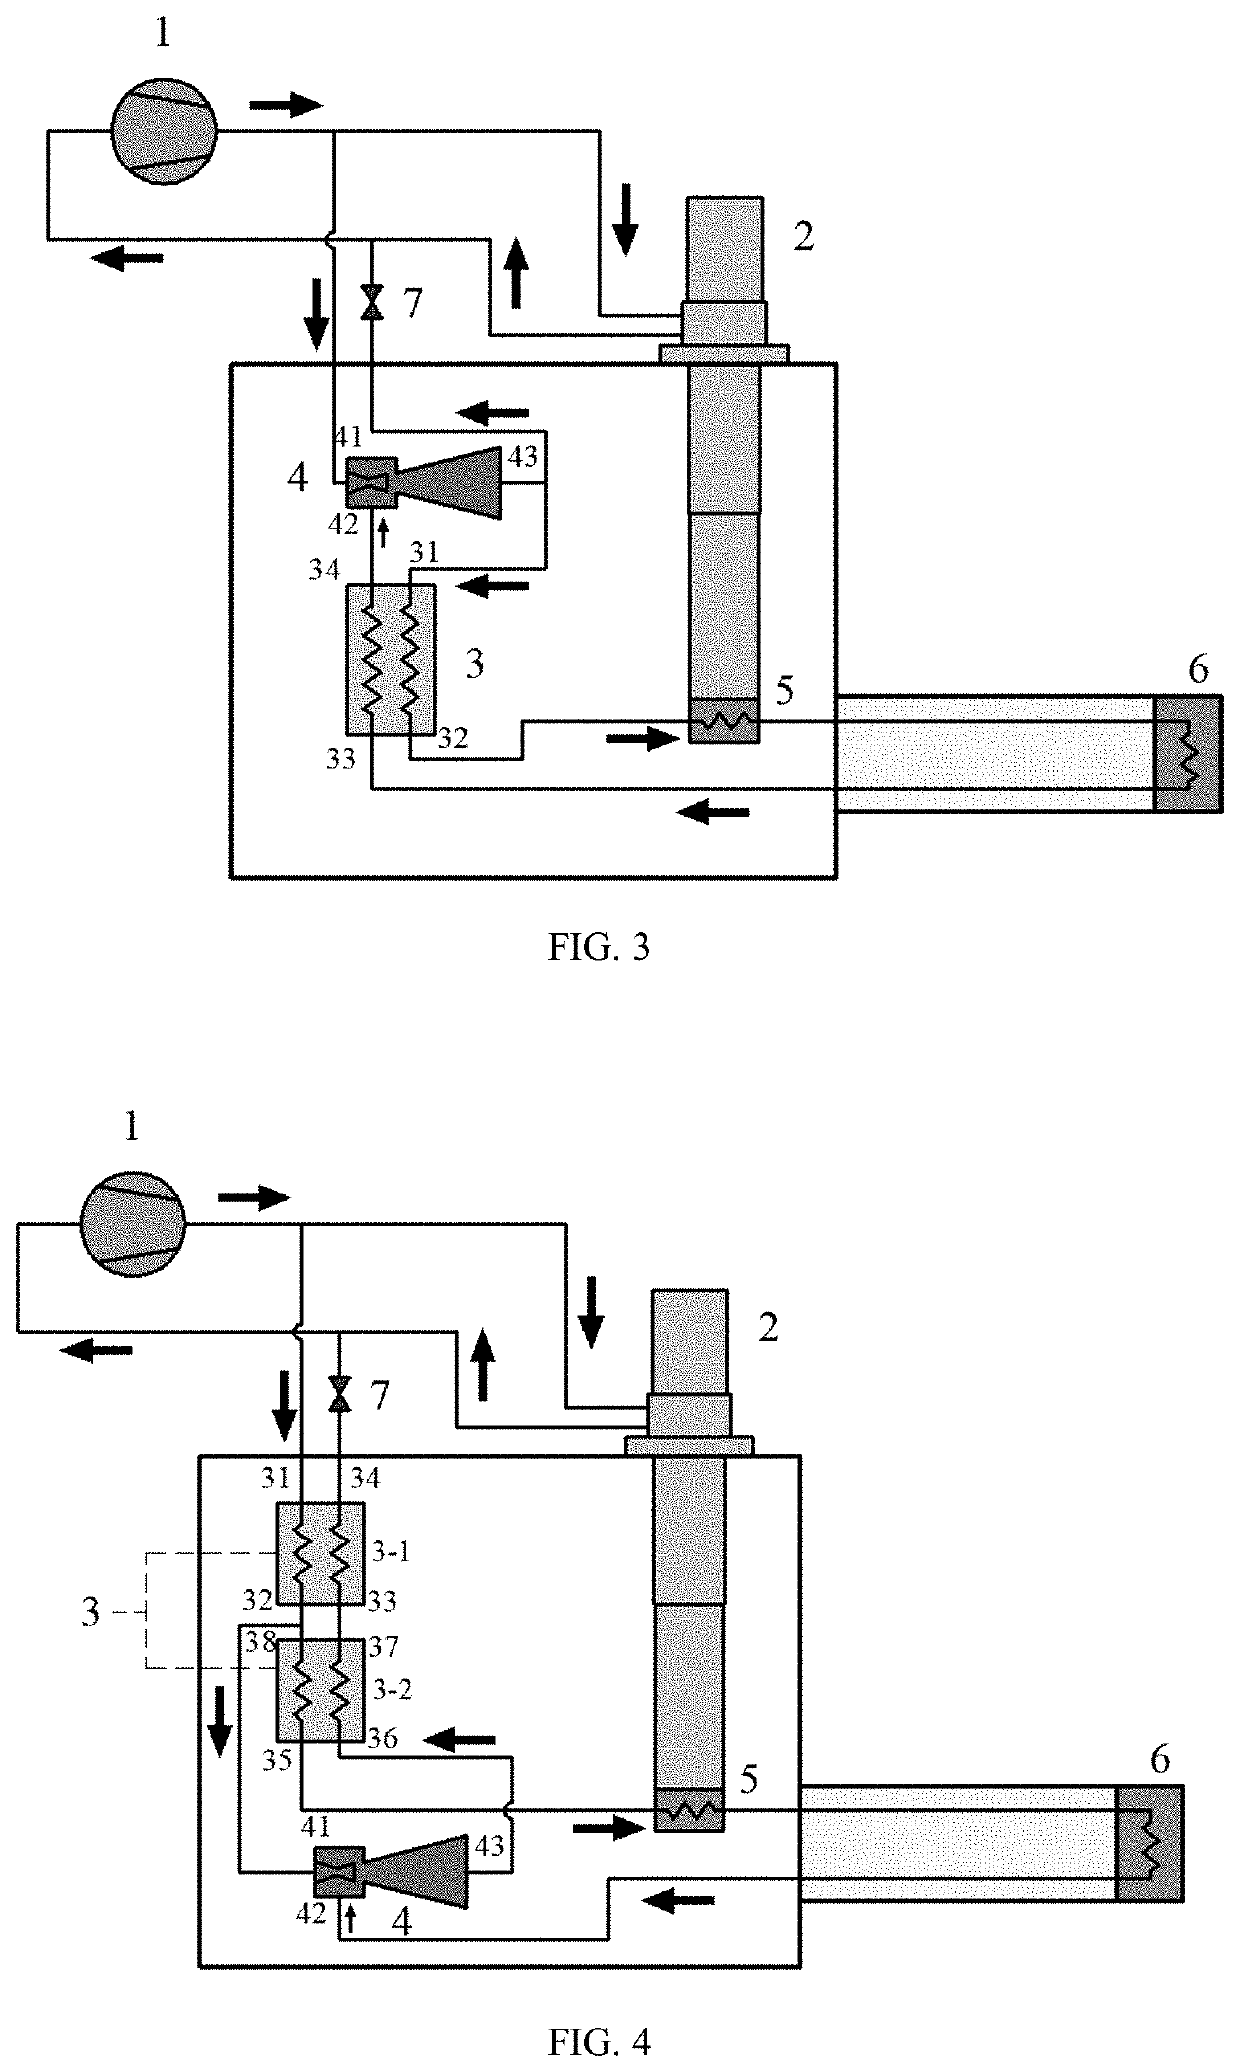 Ejector-based cryogenic refrigeration system for cold energy recovery